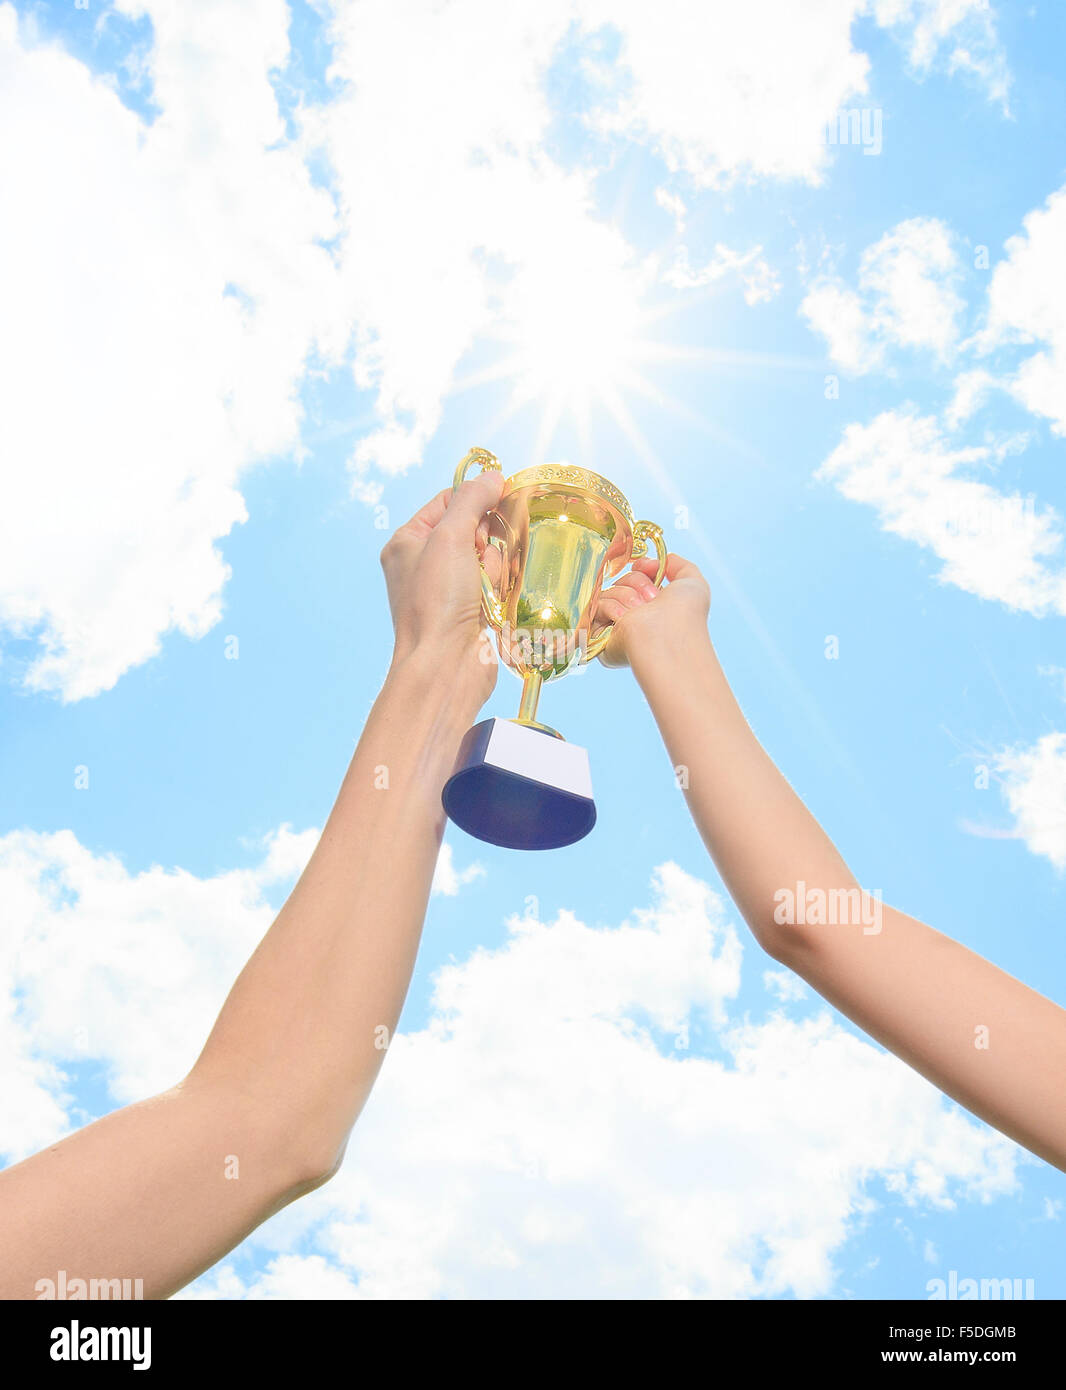 Happy mother and daughter holding a trophy high up Stock Photo